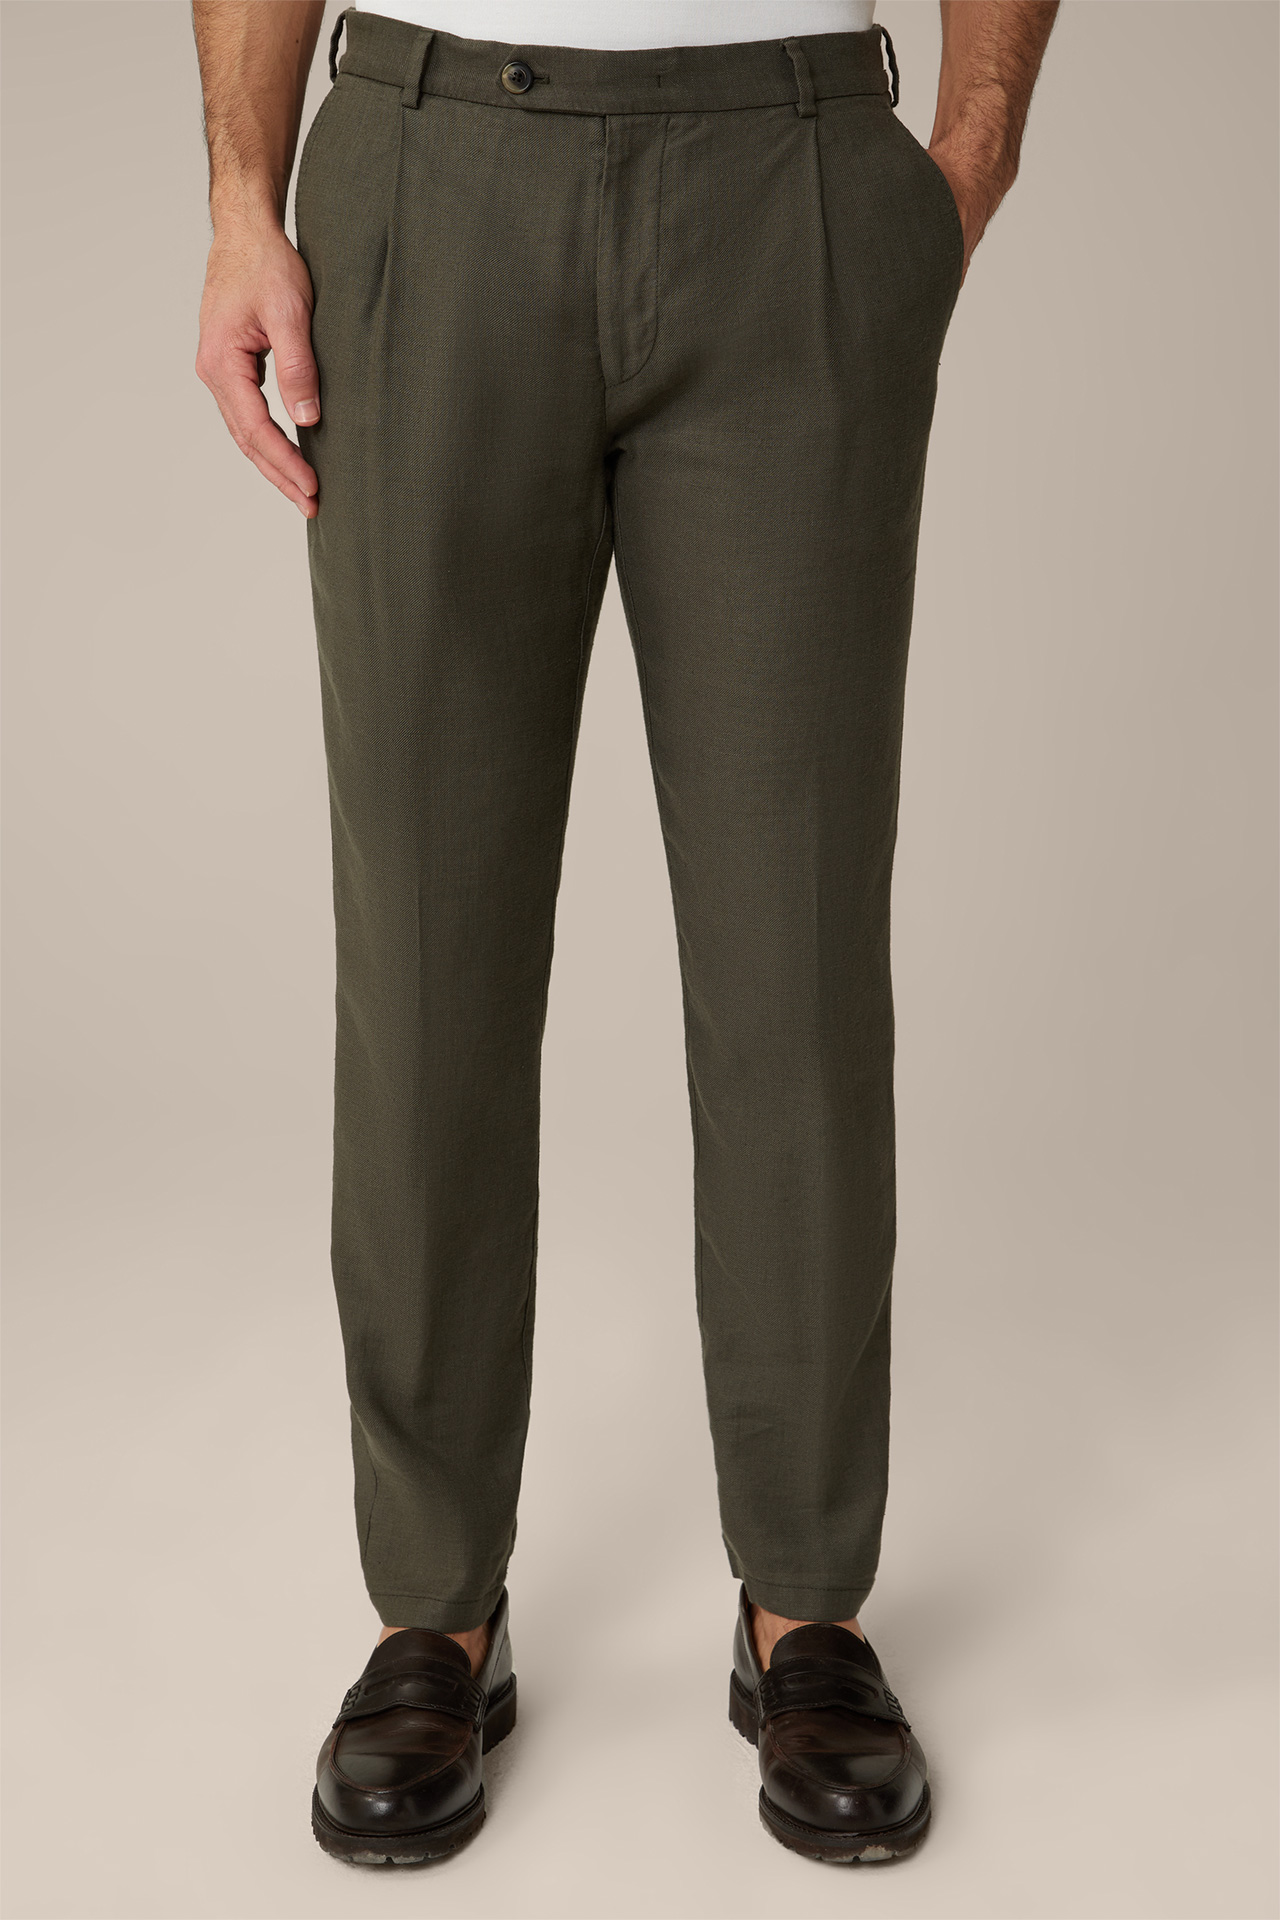 Floro Linen Mix Modular Trousers in Olive